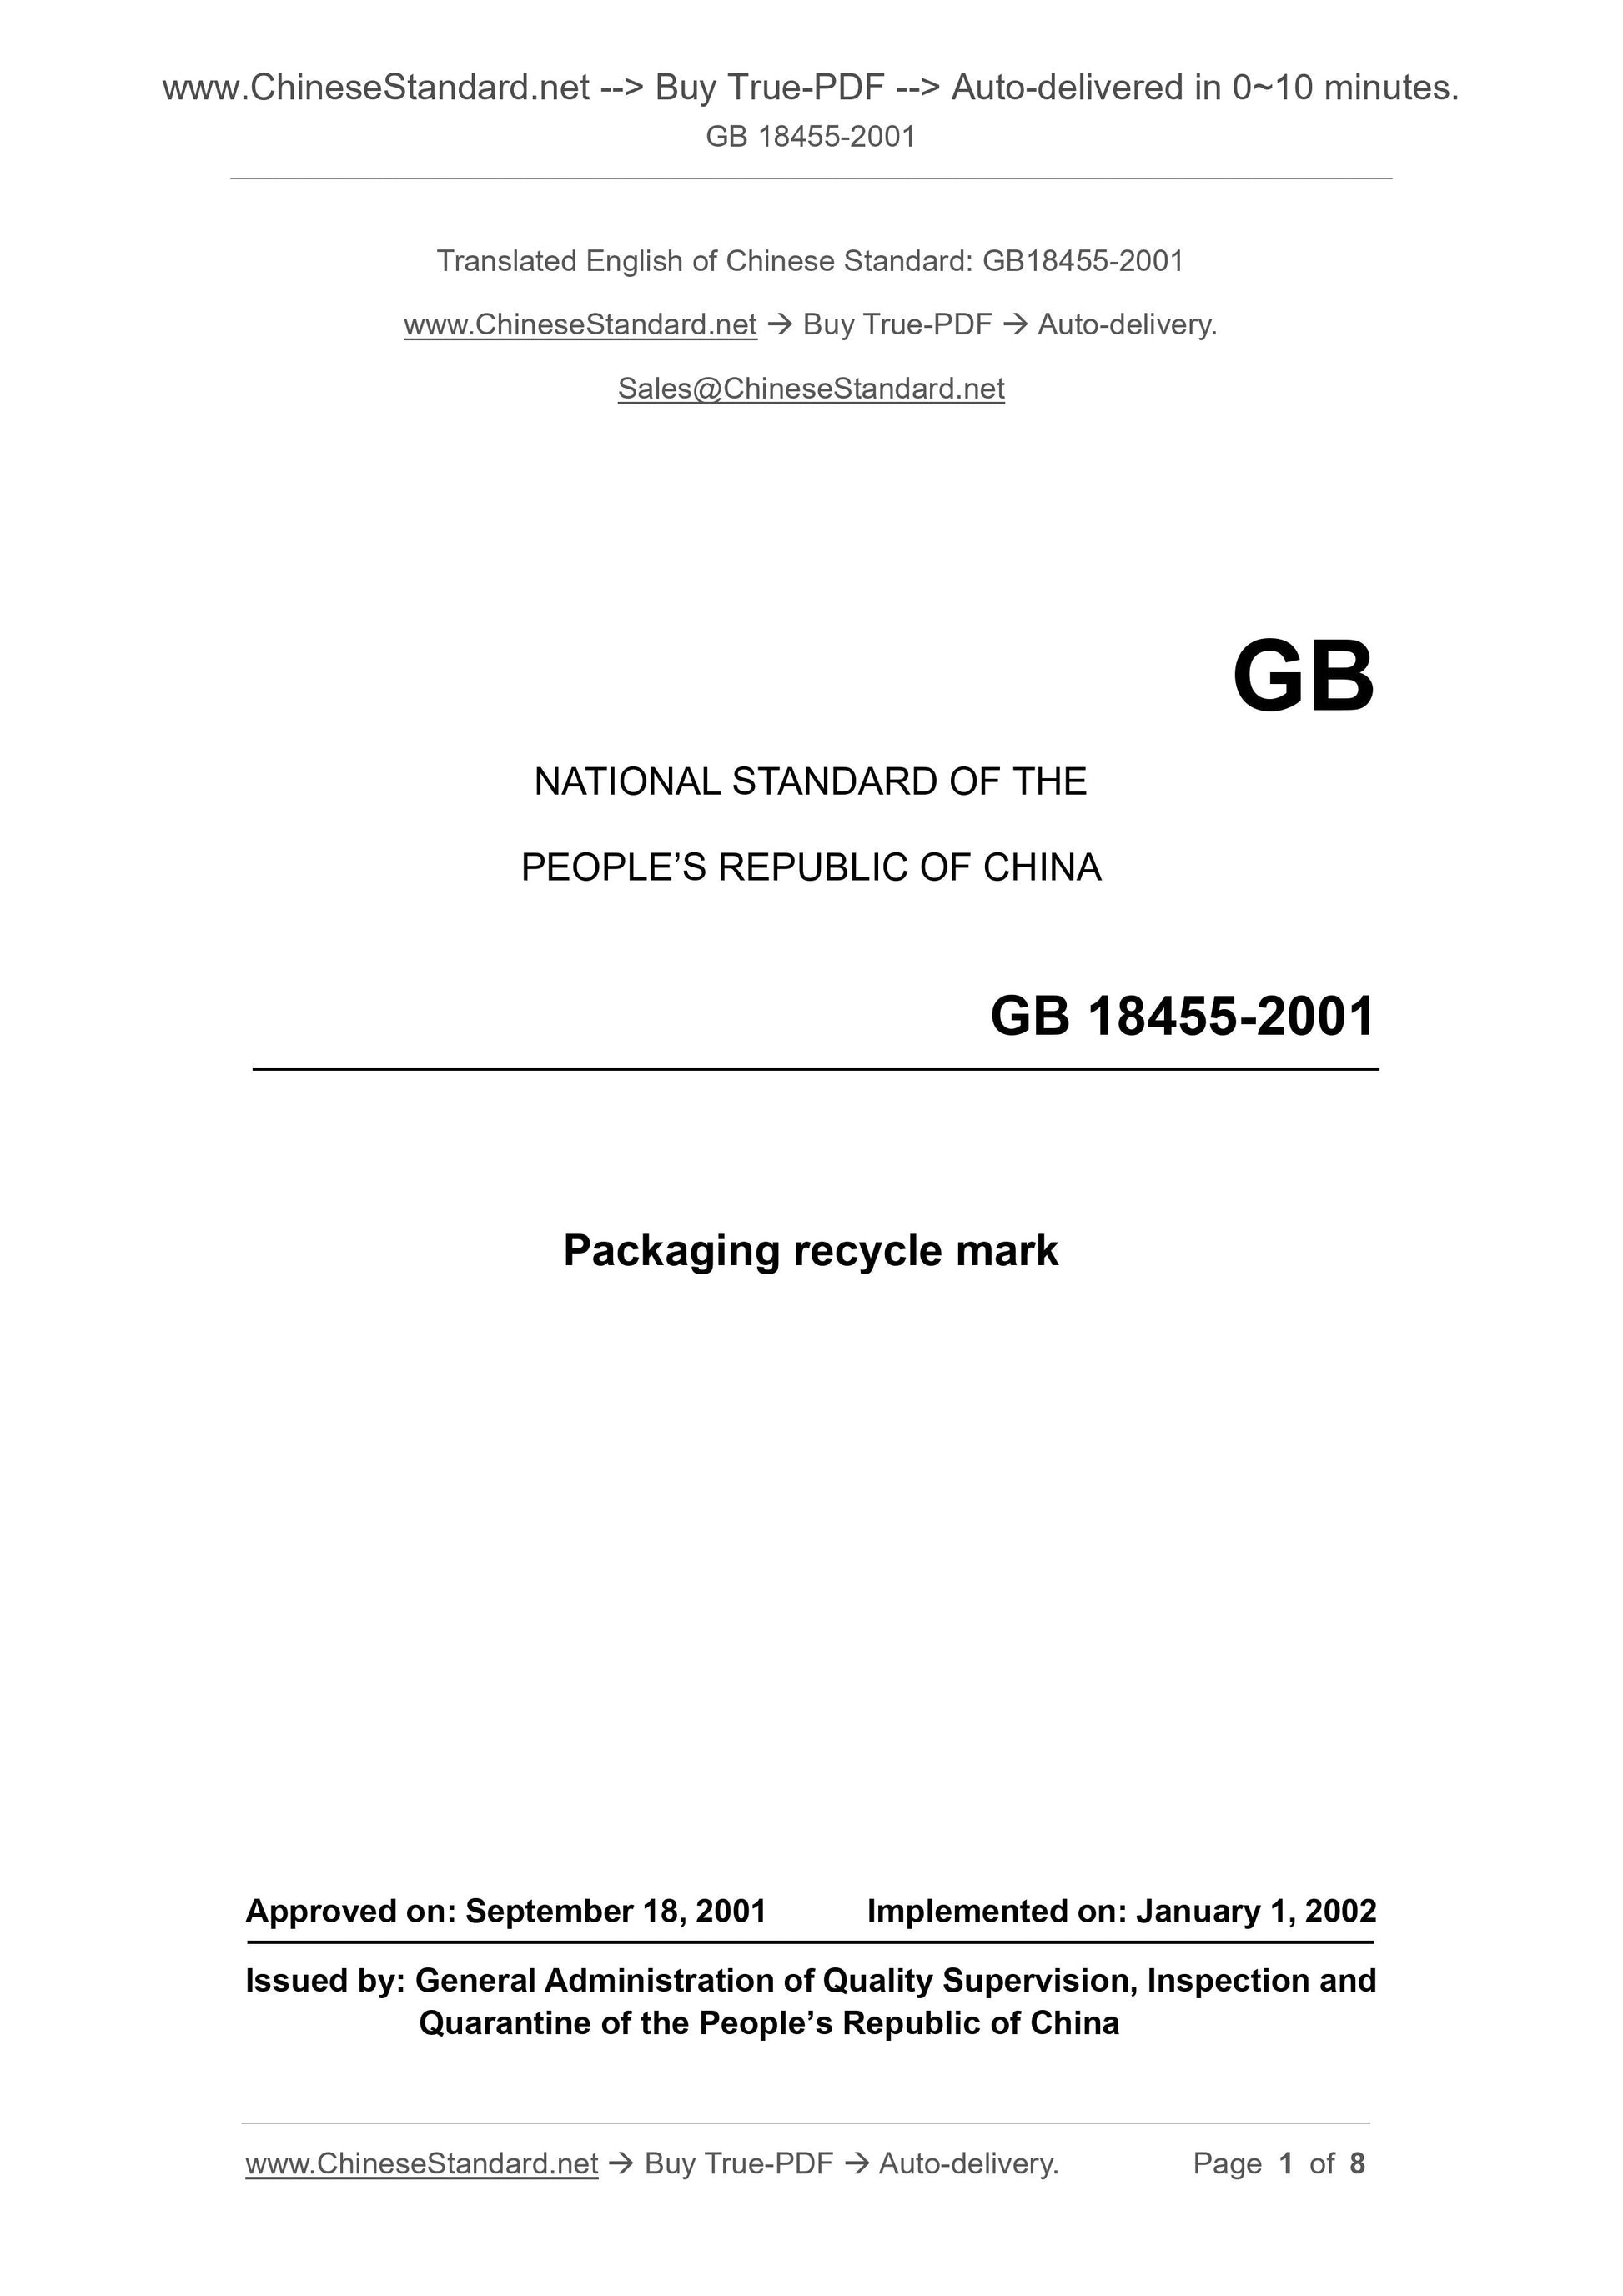 GB 18455-2001 Page 1